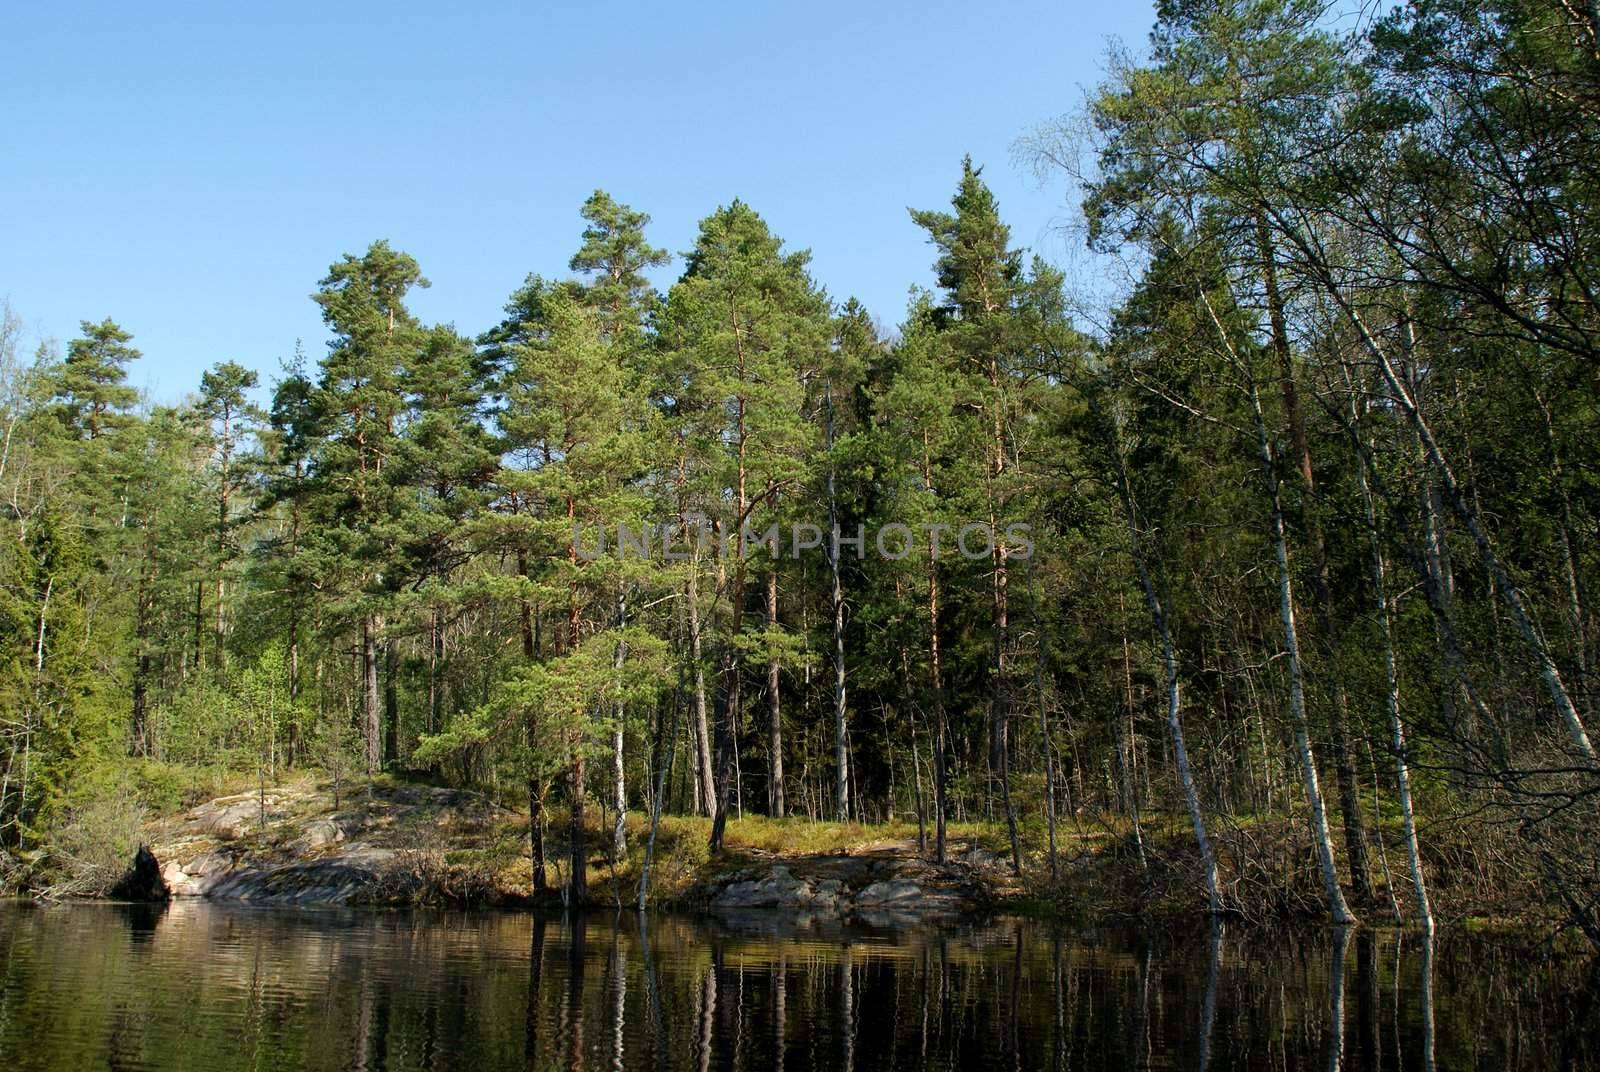 Trees reflected on a rural lake in the spring. Photographed in Salo, Finland in May 2010.